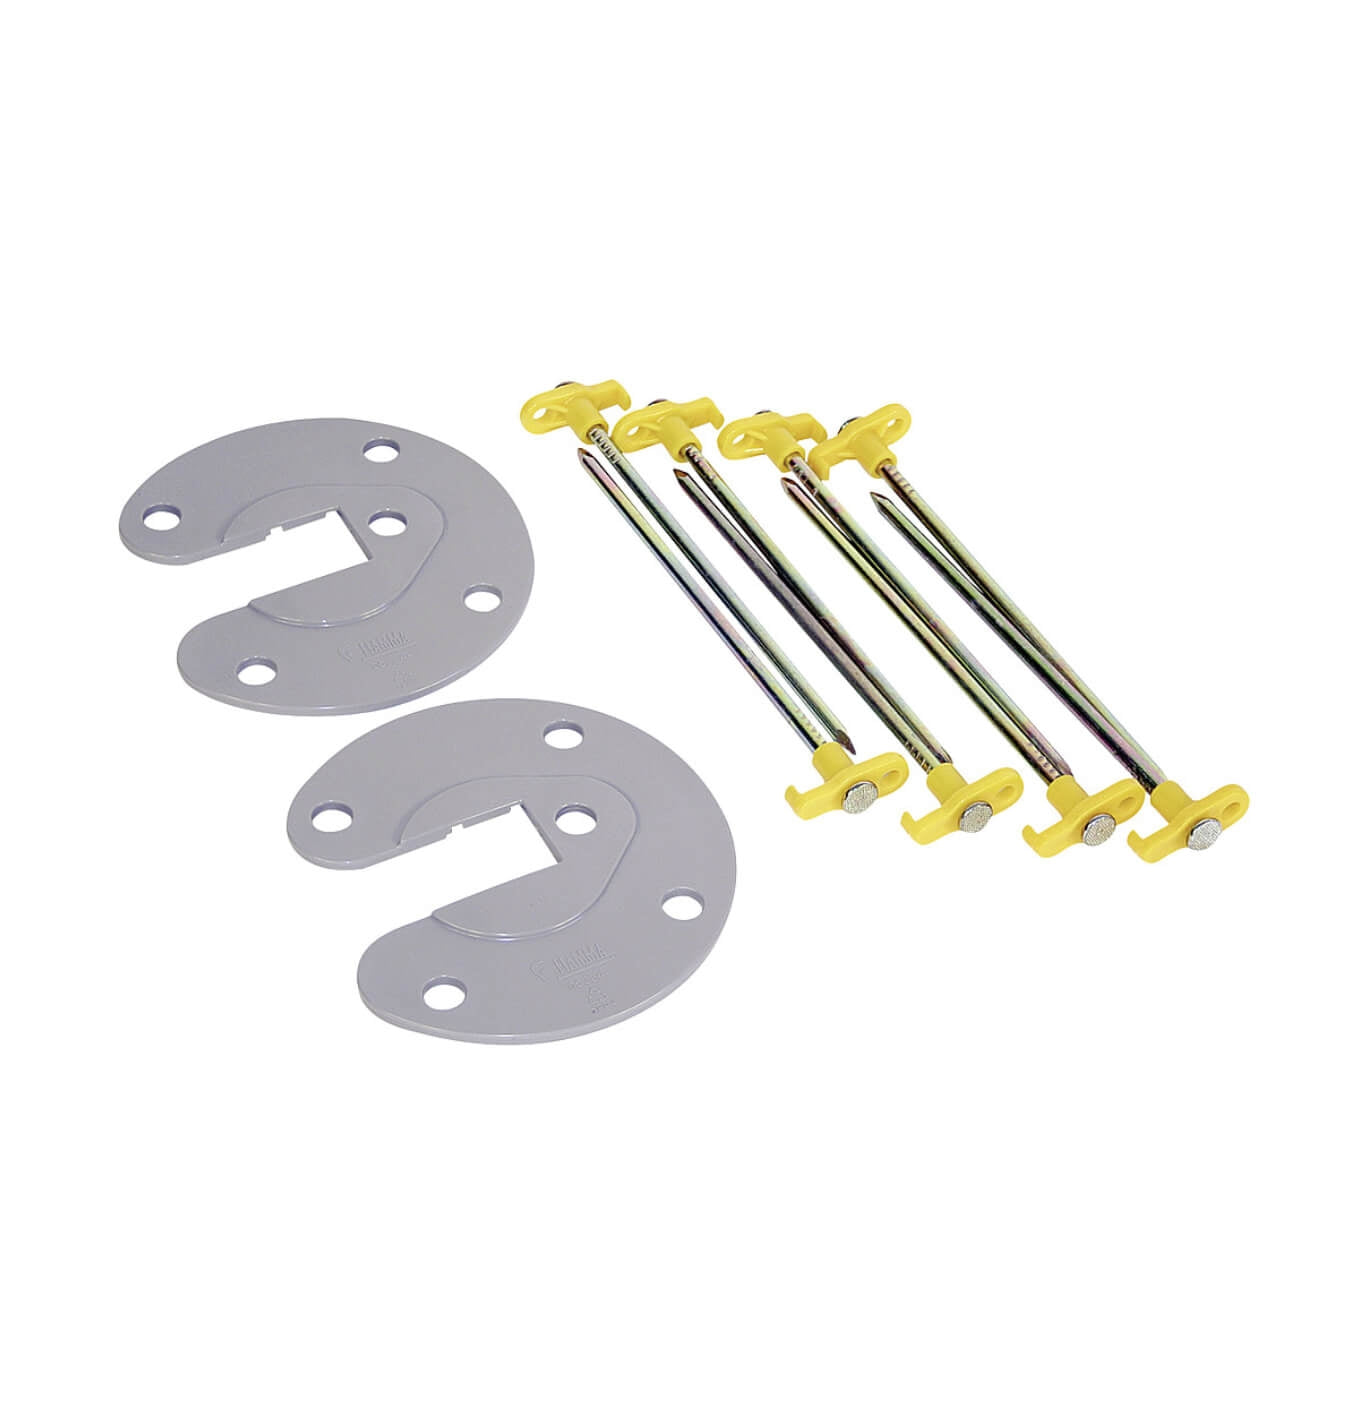 Fiamma Awning Ground Fixing Support Plates Kit | 98655-724